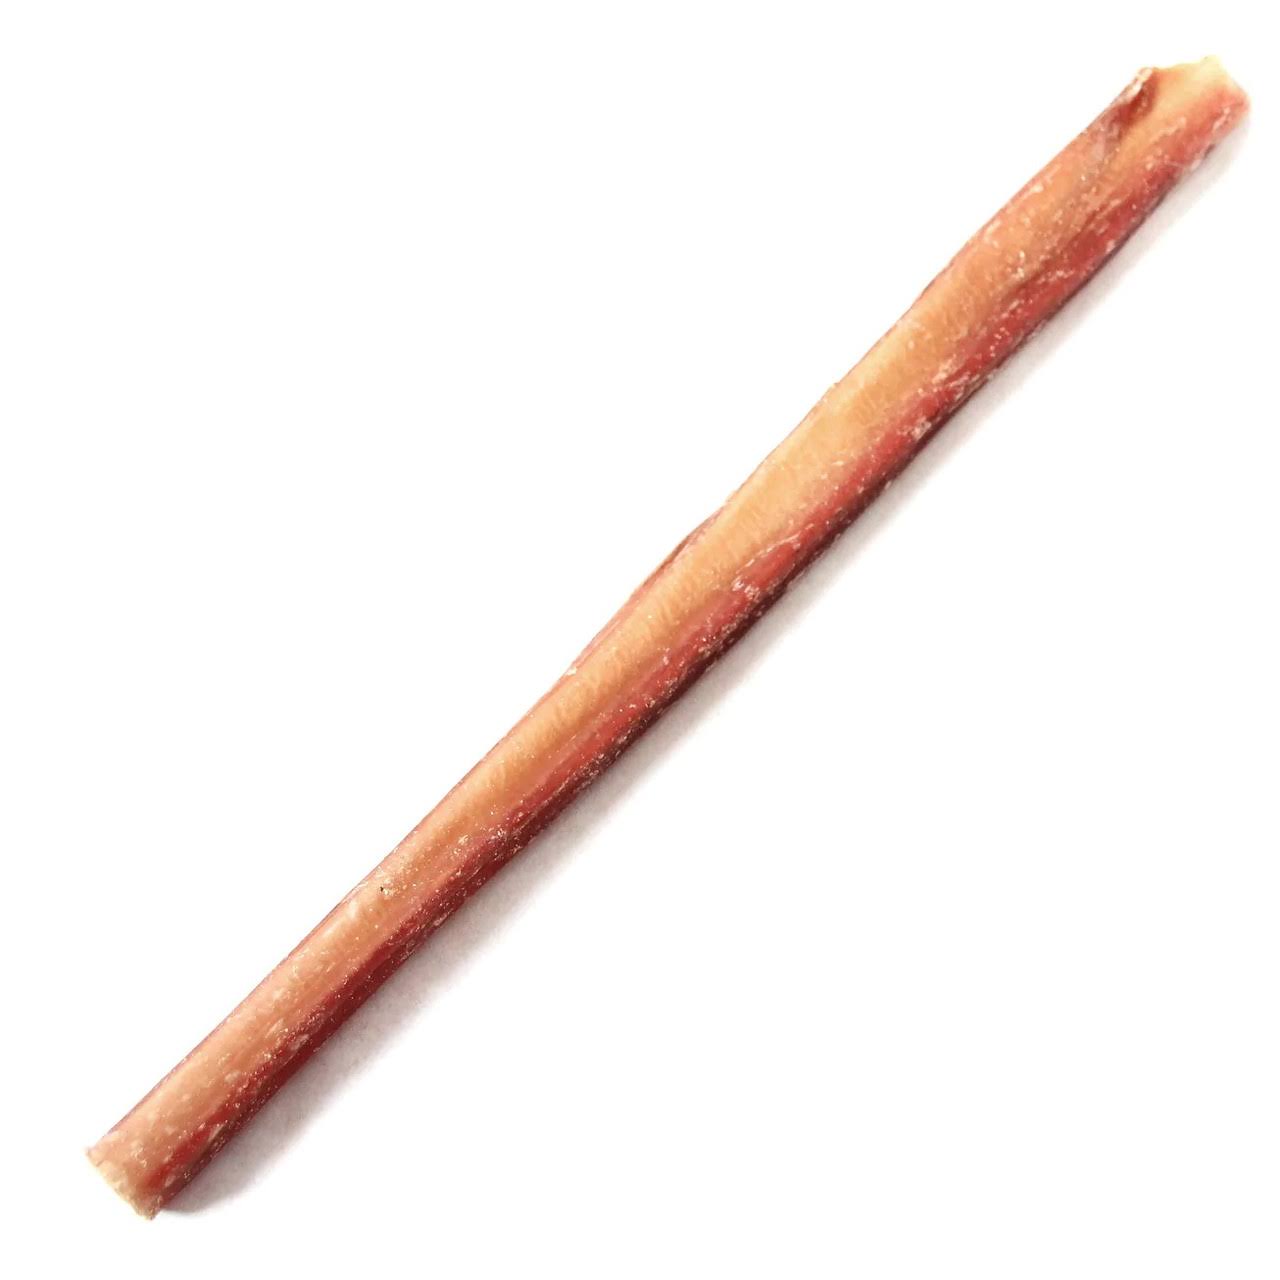 Tomlinson's Feed Thick Bully Stick, 12-Inch / 12 Inch.